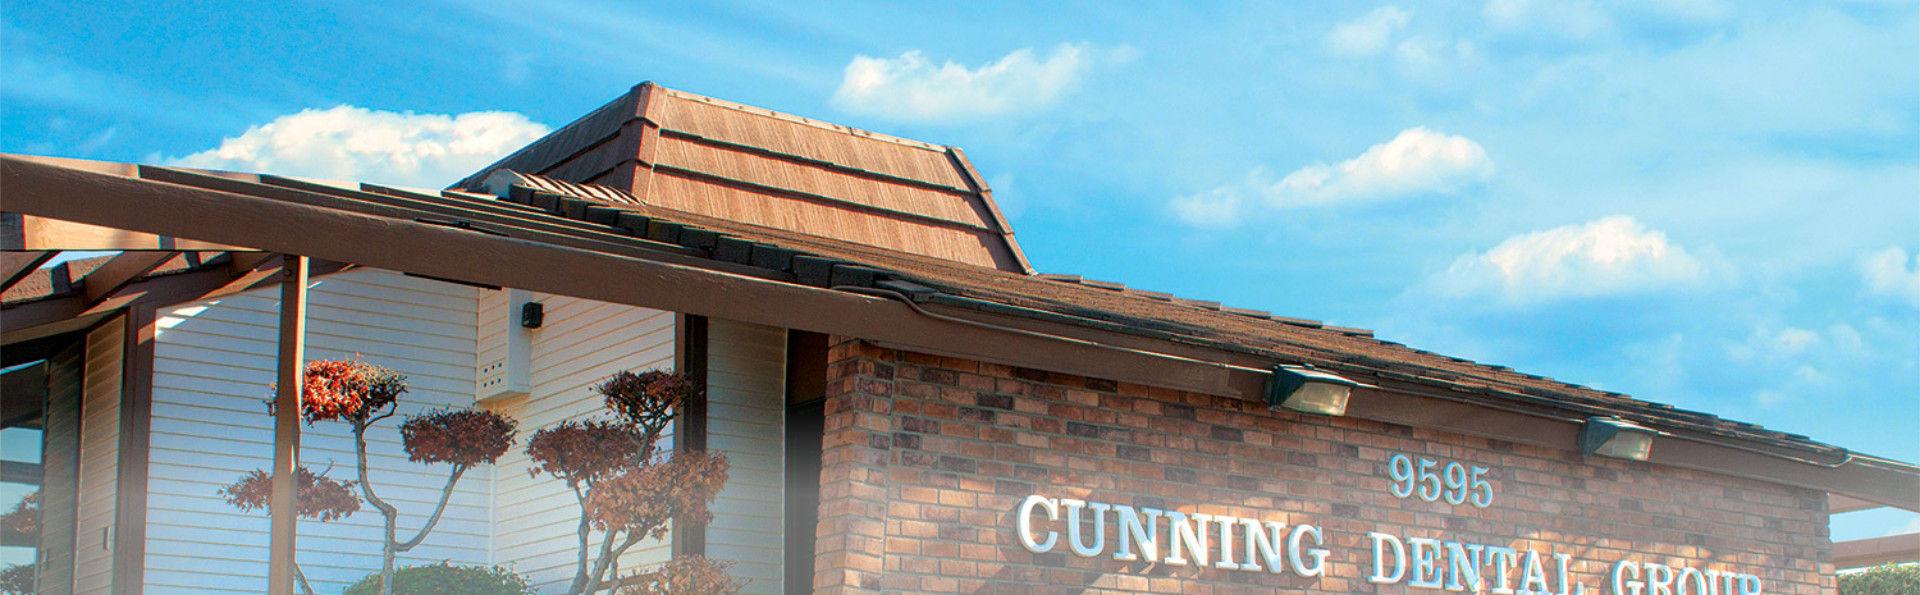 Cunning Dental has been a Montclair fixture for over 40 years